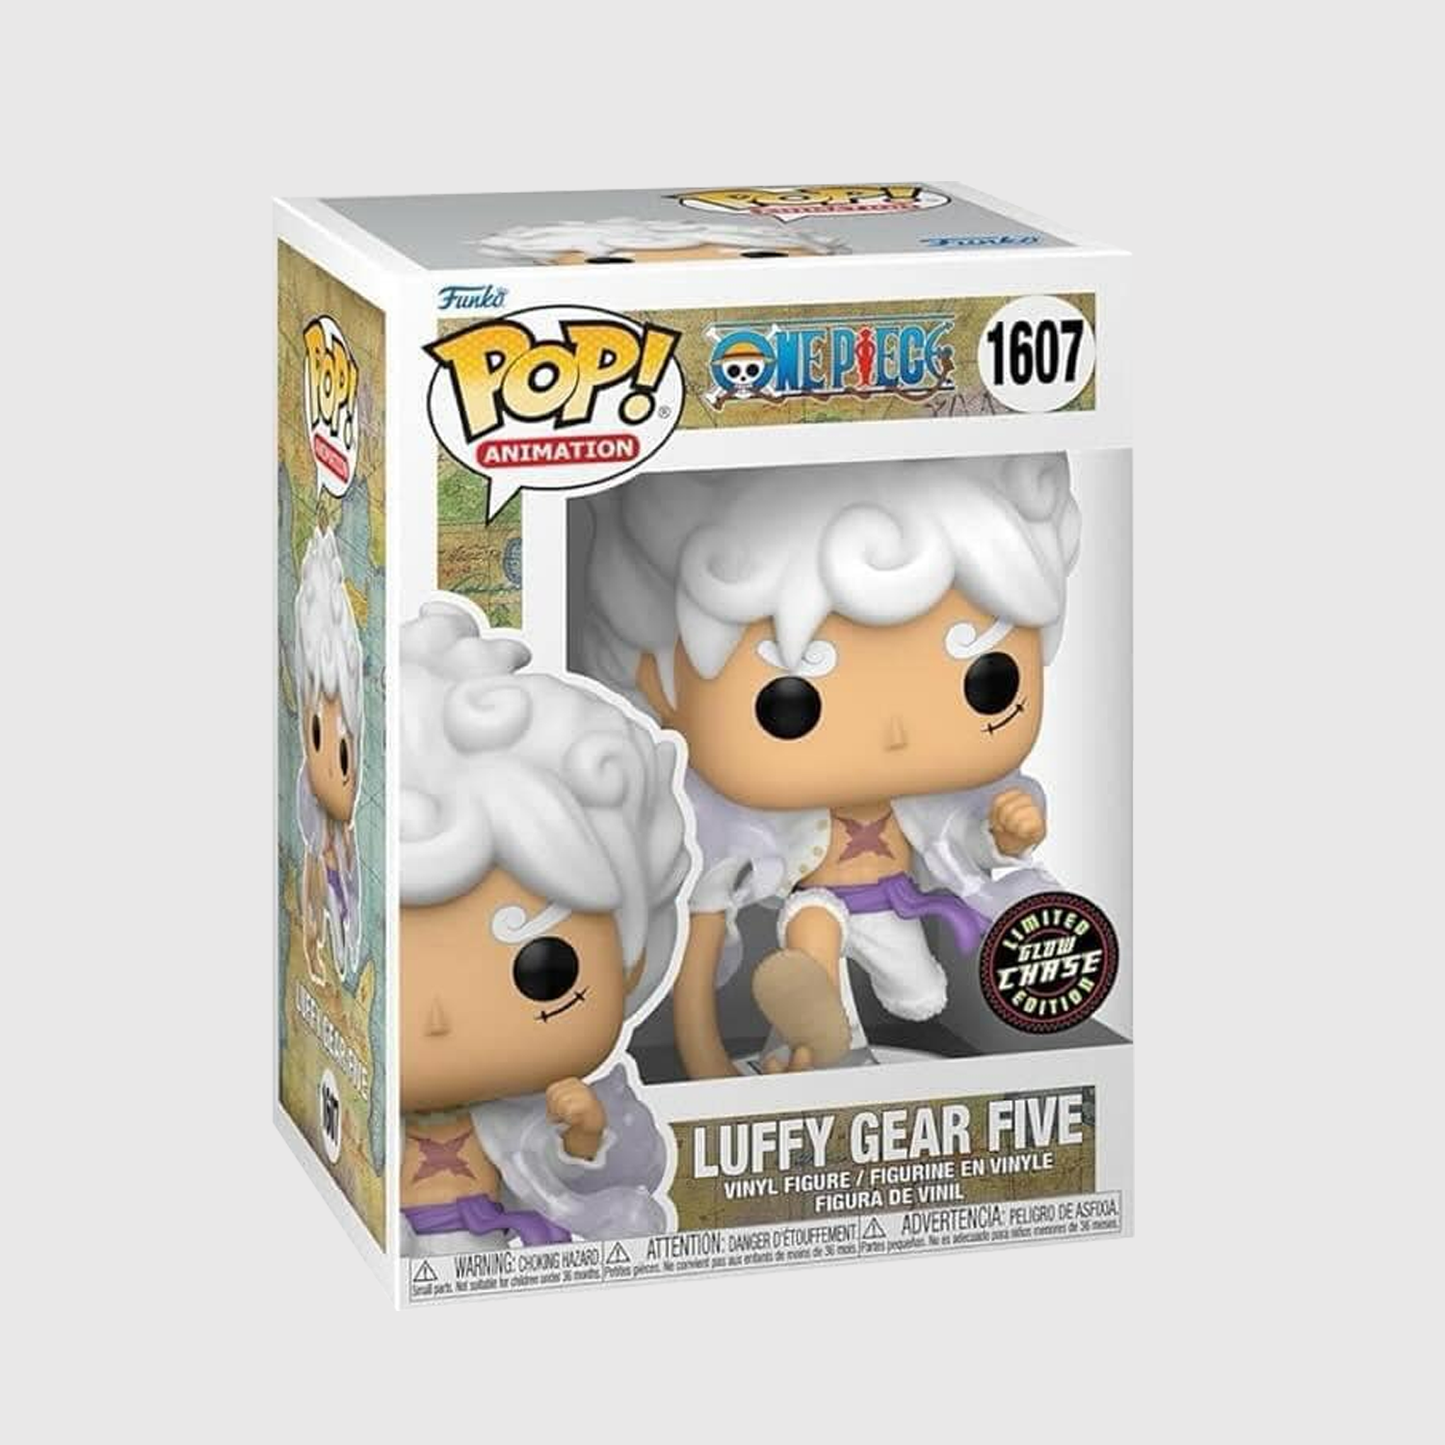 (PRE-ORDER) Funko POP! Animation: One Piece - Luffy Gear Five GLOW CHASE #1607